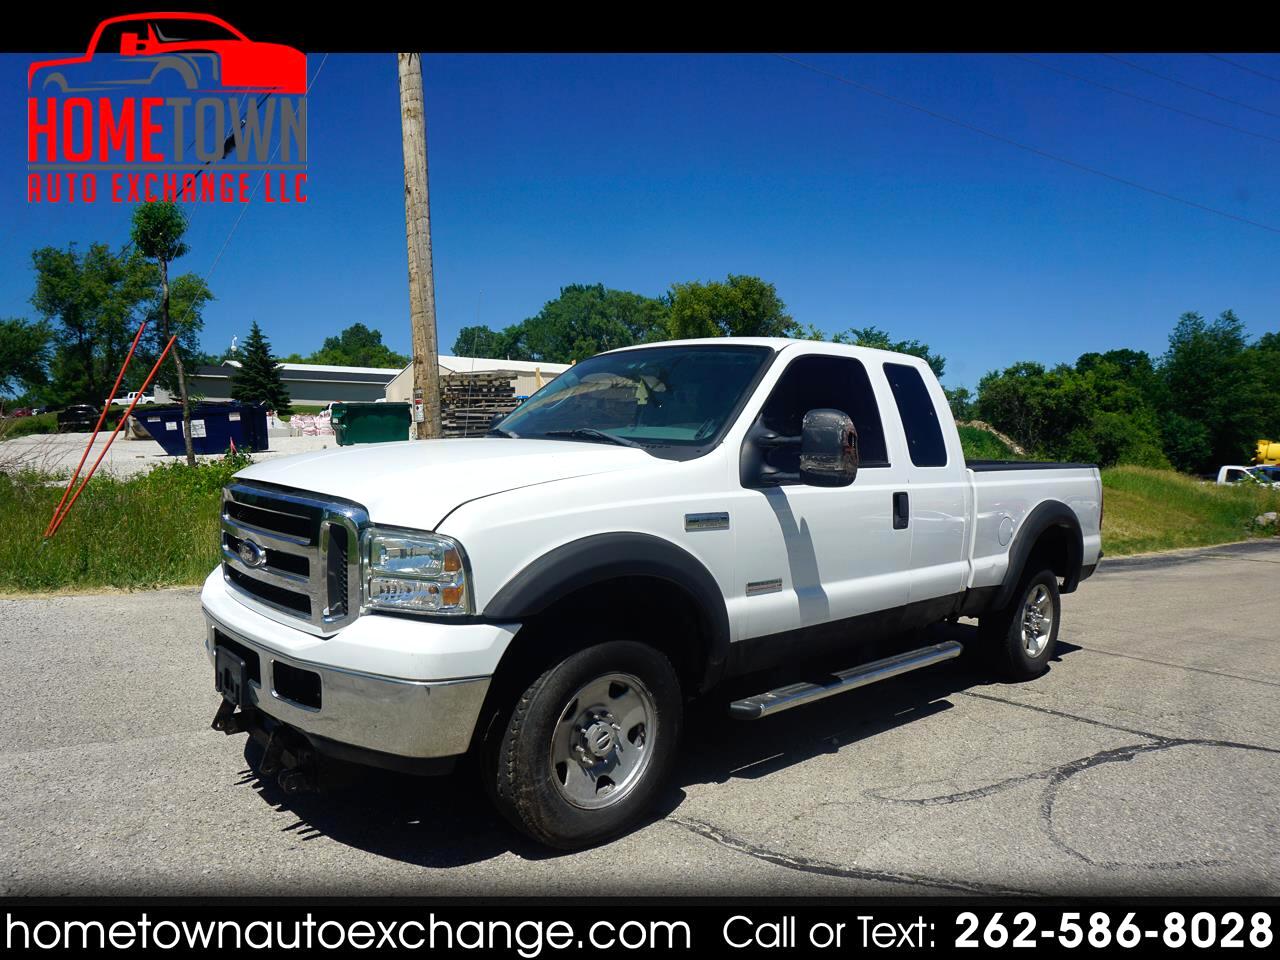 Ford Super Duty F-250 Supercab 142" Lariat 4WD 2005